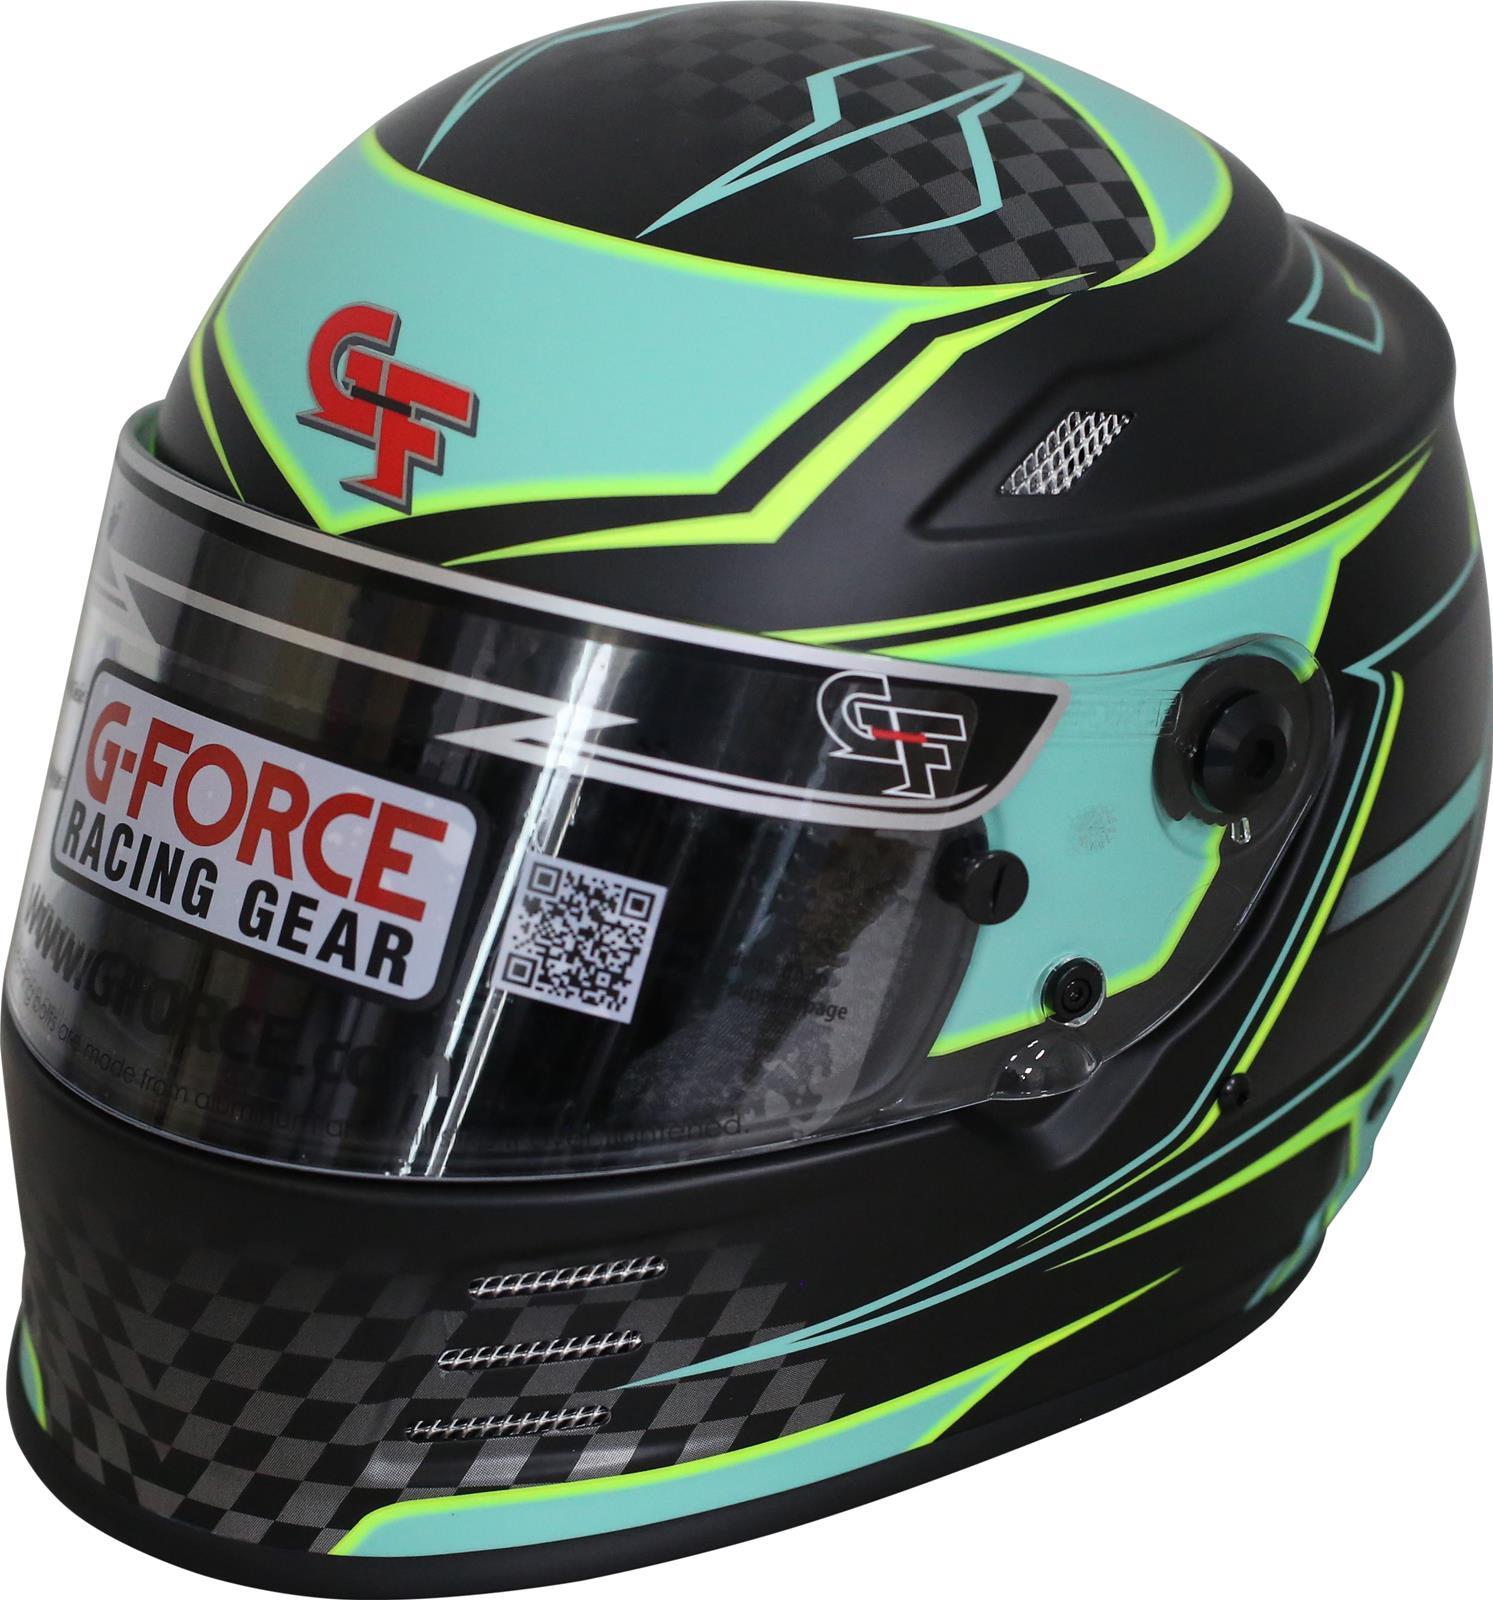 G-Force Racing Gear 13005XSMTL Helmet, Revo Graphics, Full Face, Snell SA2020, Head and Neck Support Ready, Black / Teal, X-Small, Each